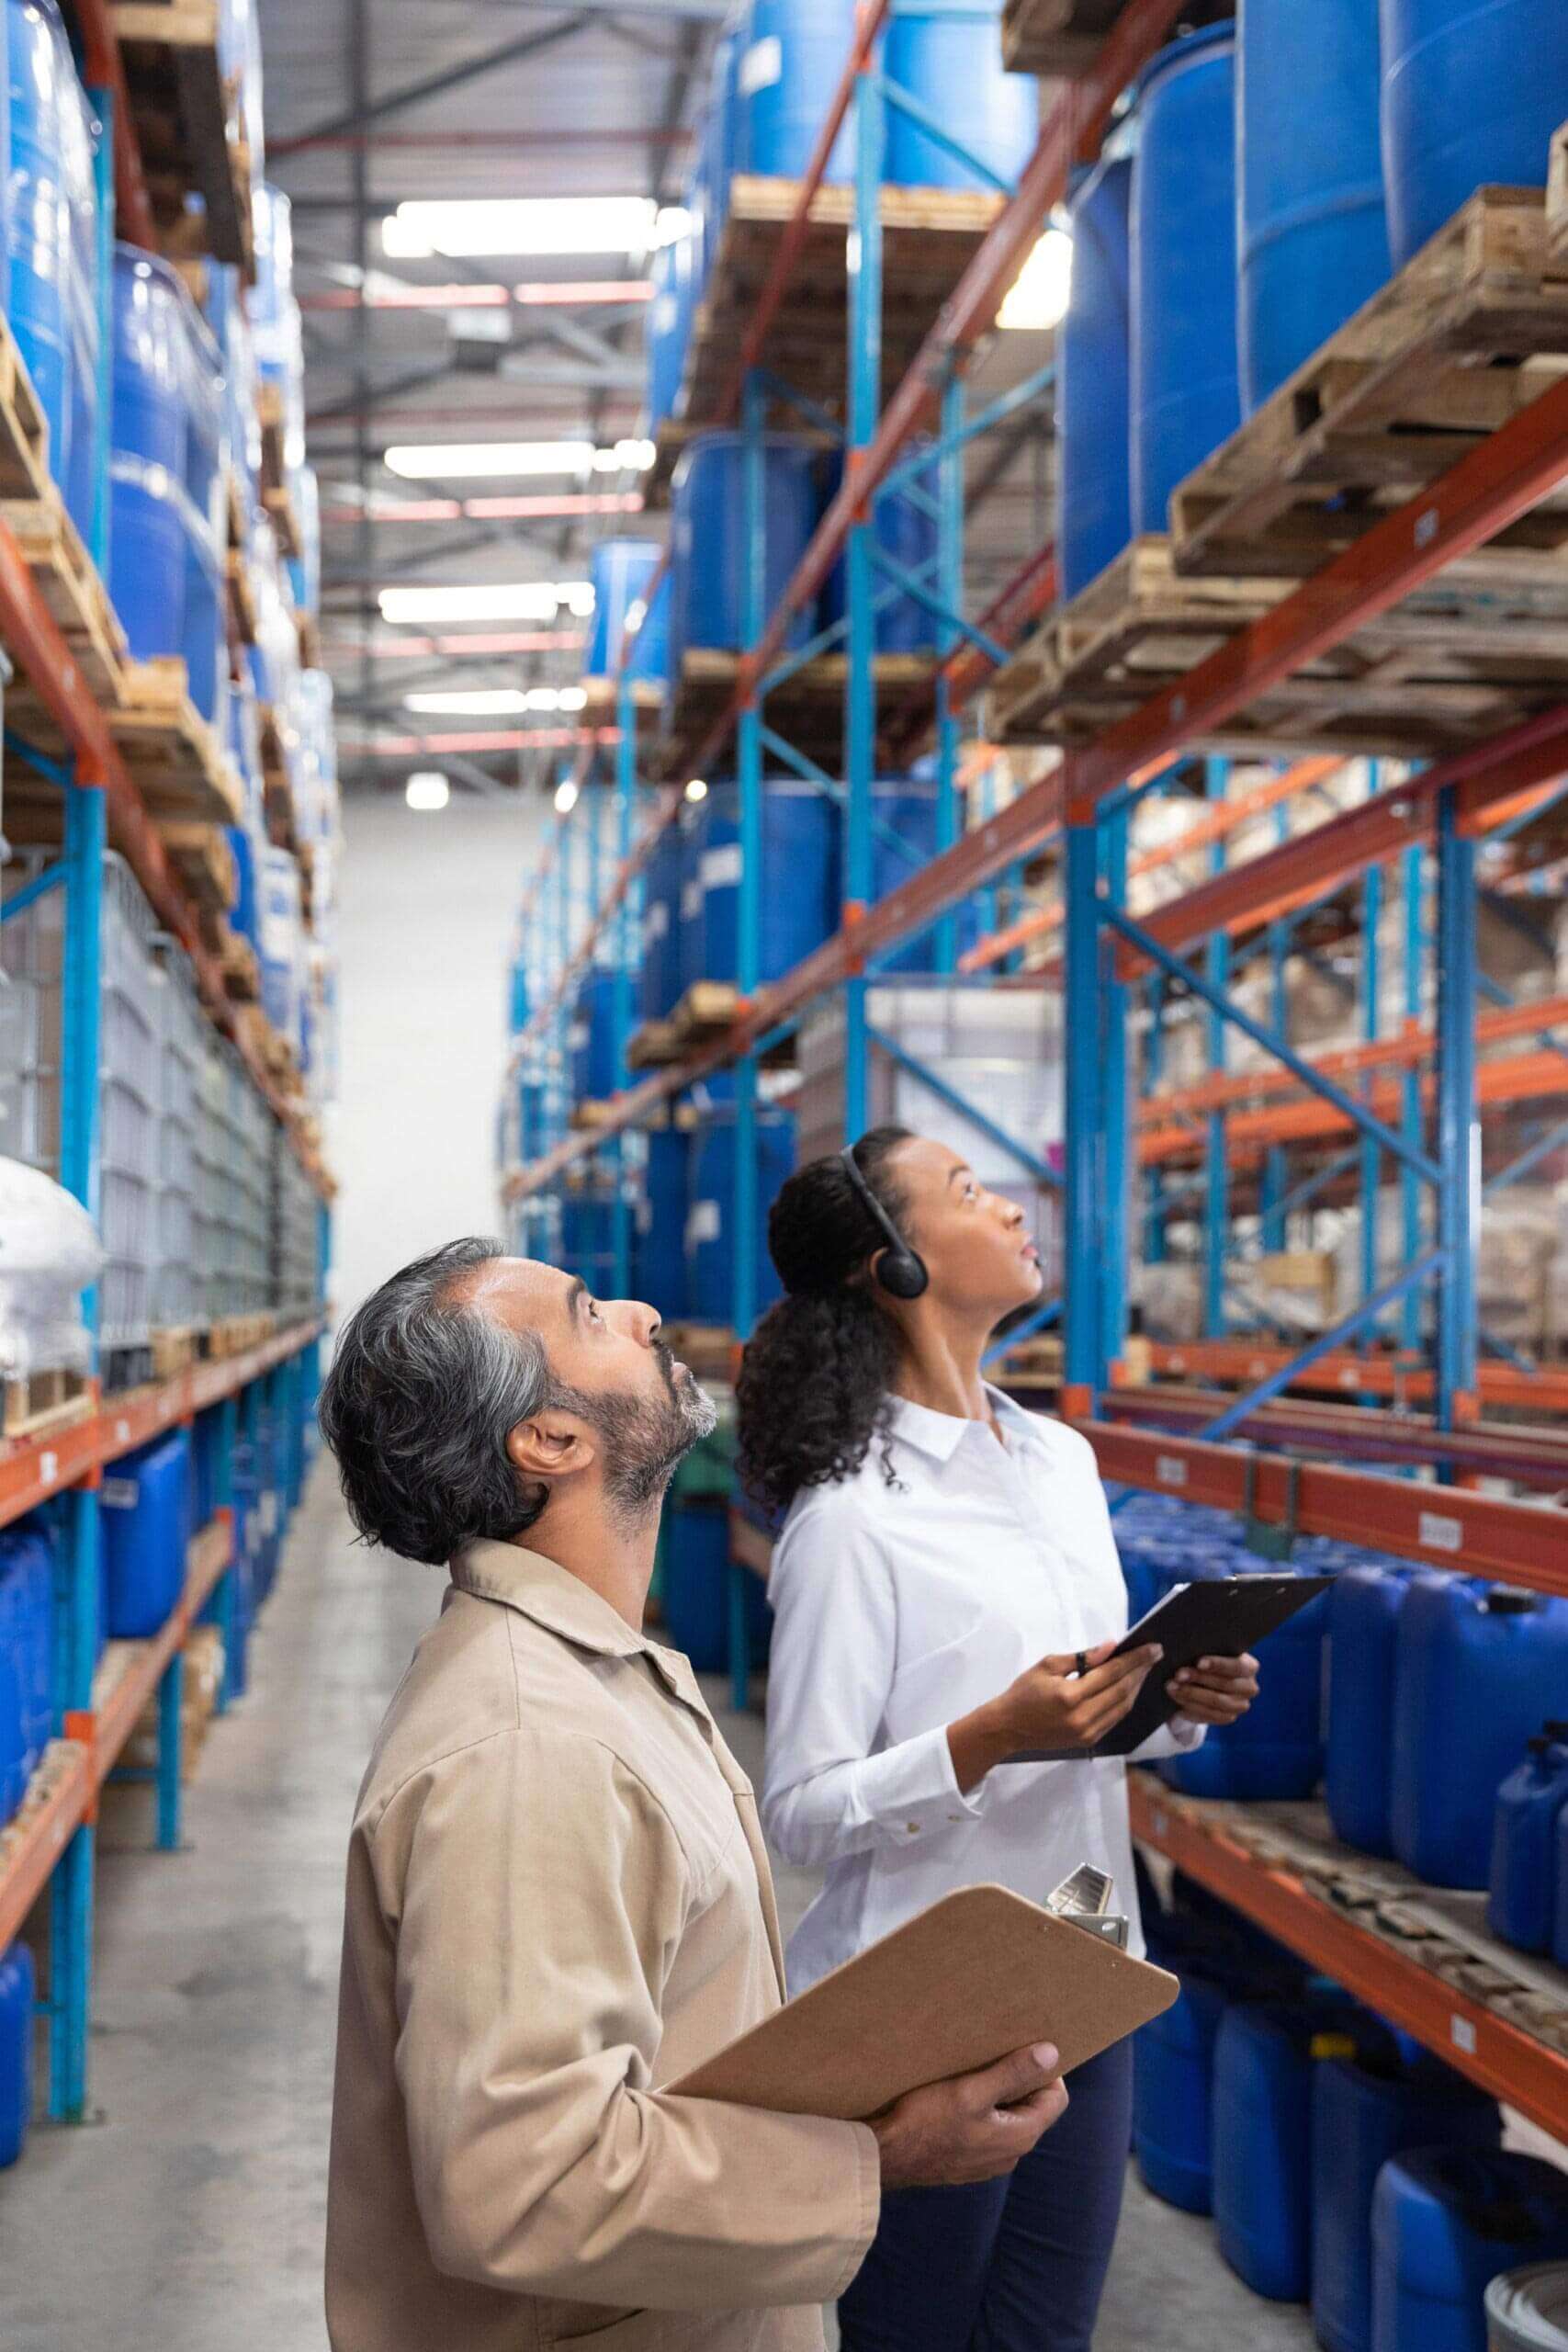 Large warehouse with shelves stacked with blue barrels; man and woman looking up holding a tablet and clipboard